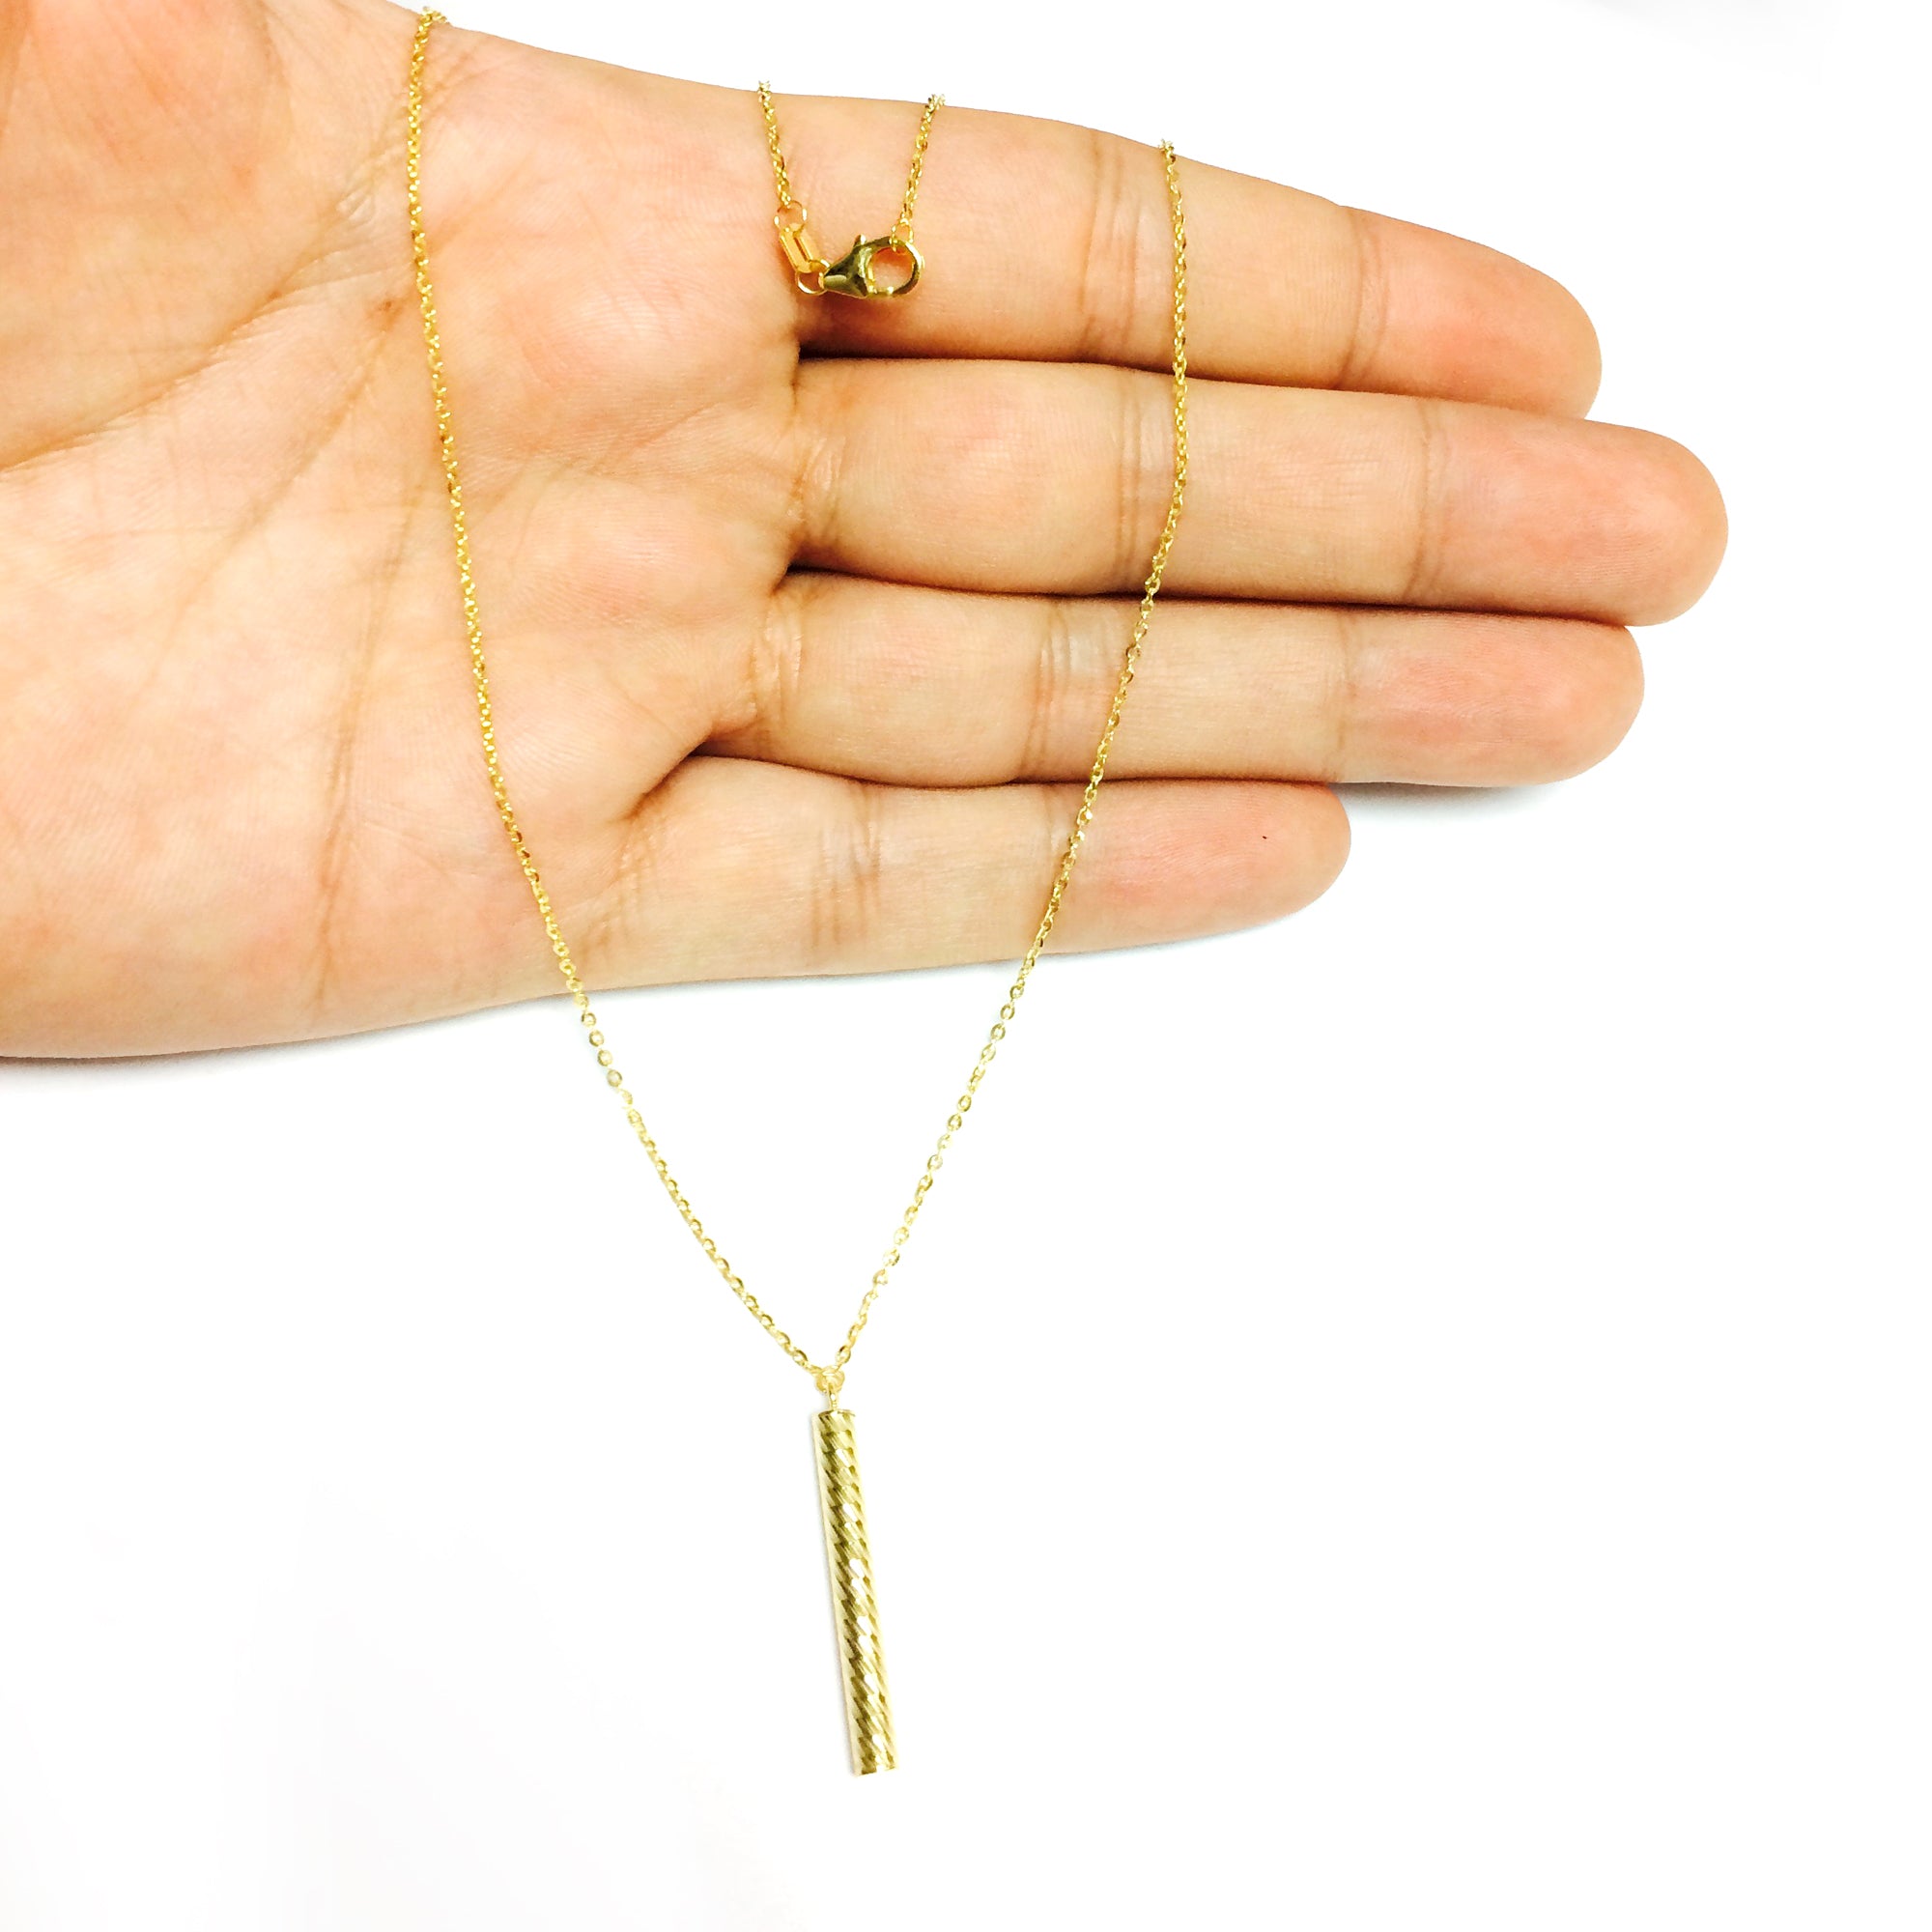 14k Yellow Gold Textured Hanging Bar Pendant Necklace, 18" fine designer jewelry for men and women